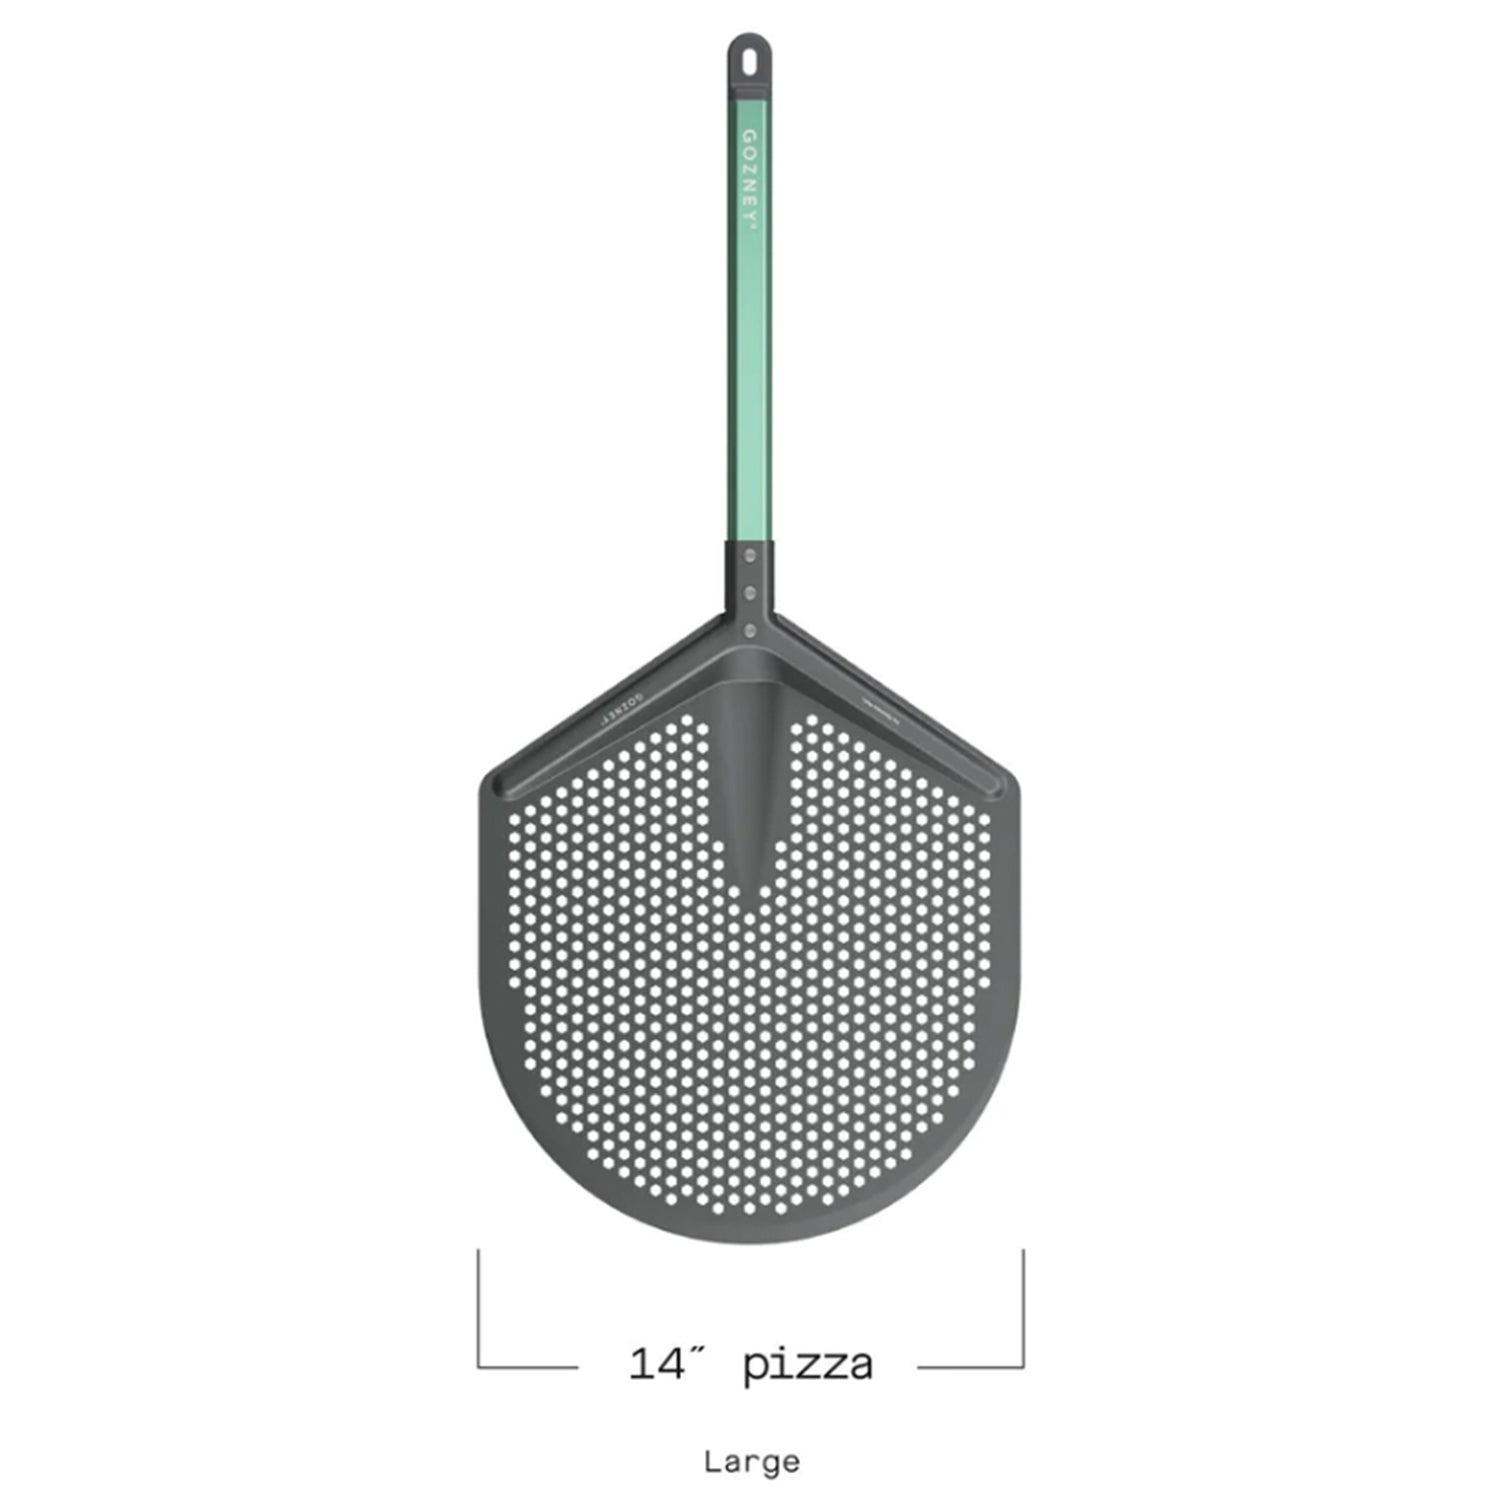 Gozney Pro Placement 14" Pizza Peel Lightweight Aluminum Perforated Blade AD1778